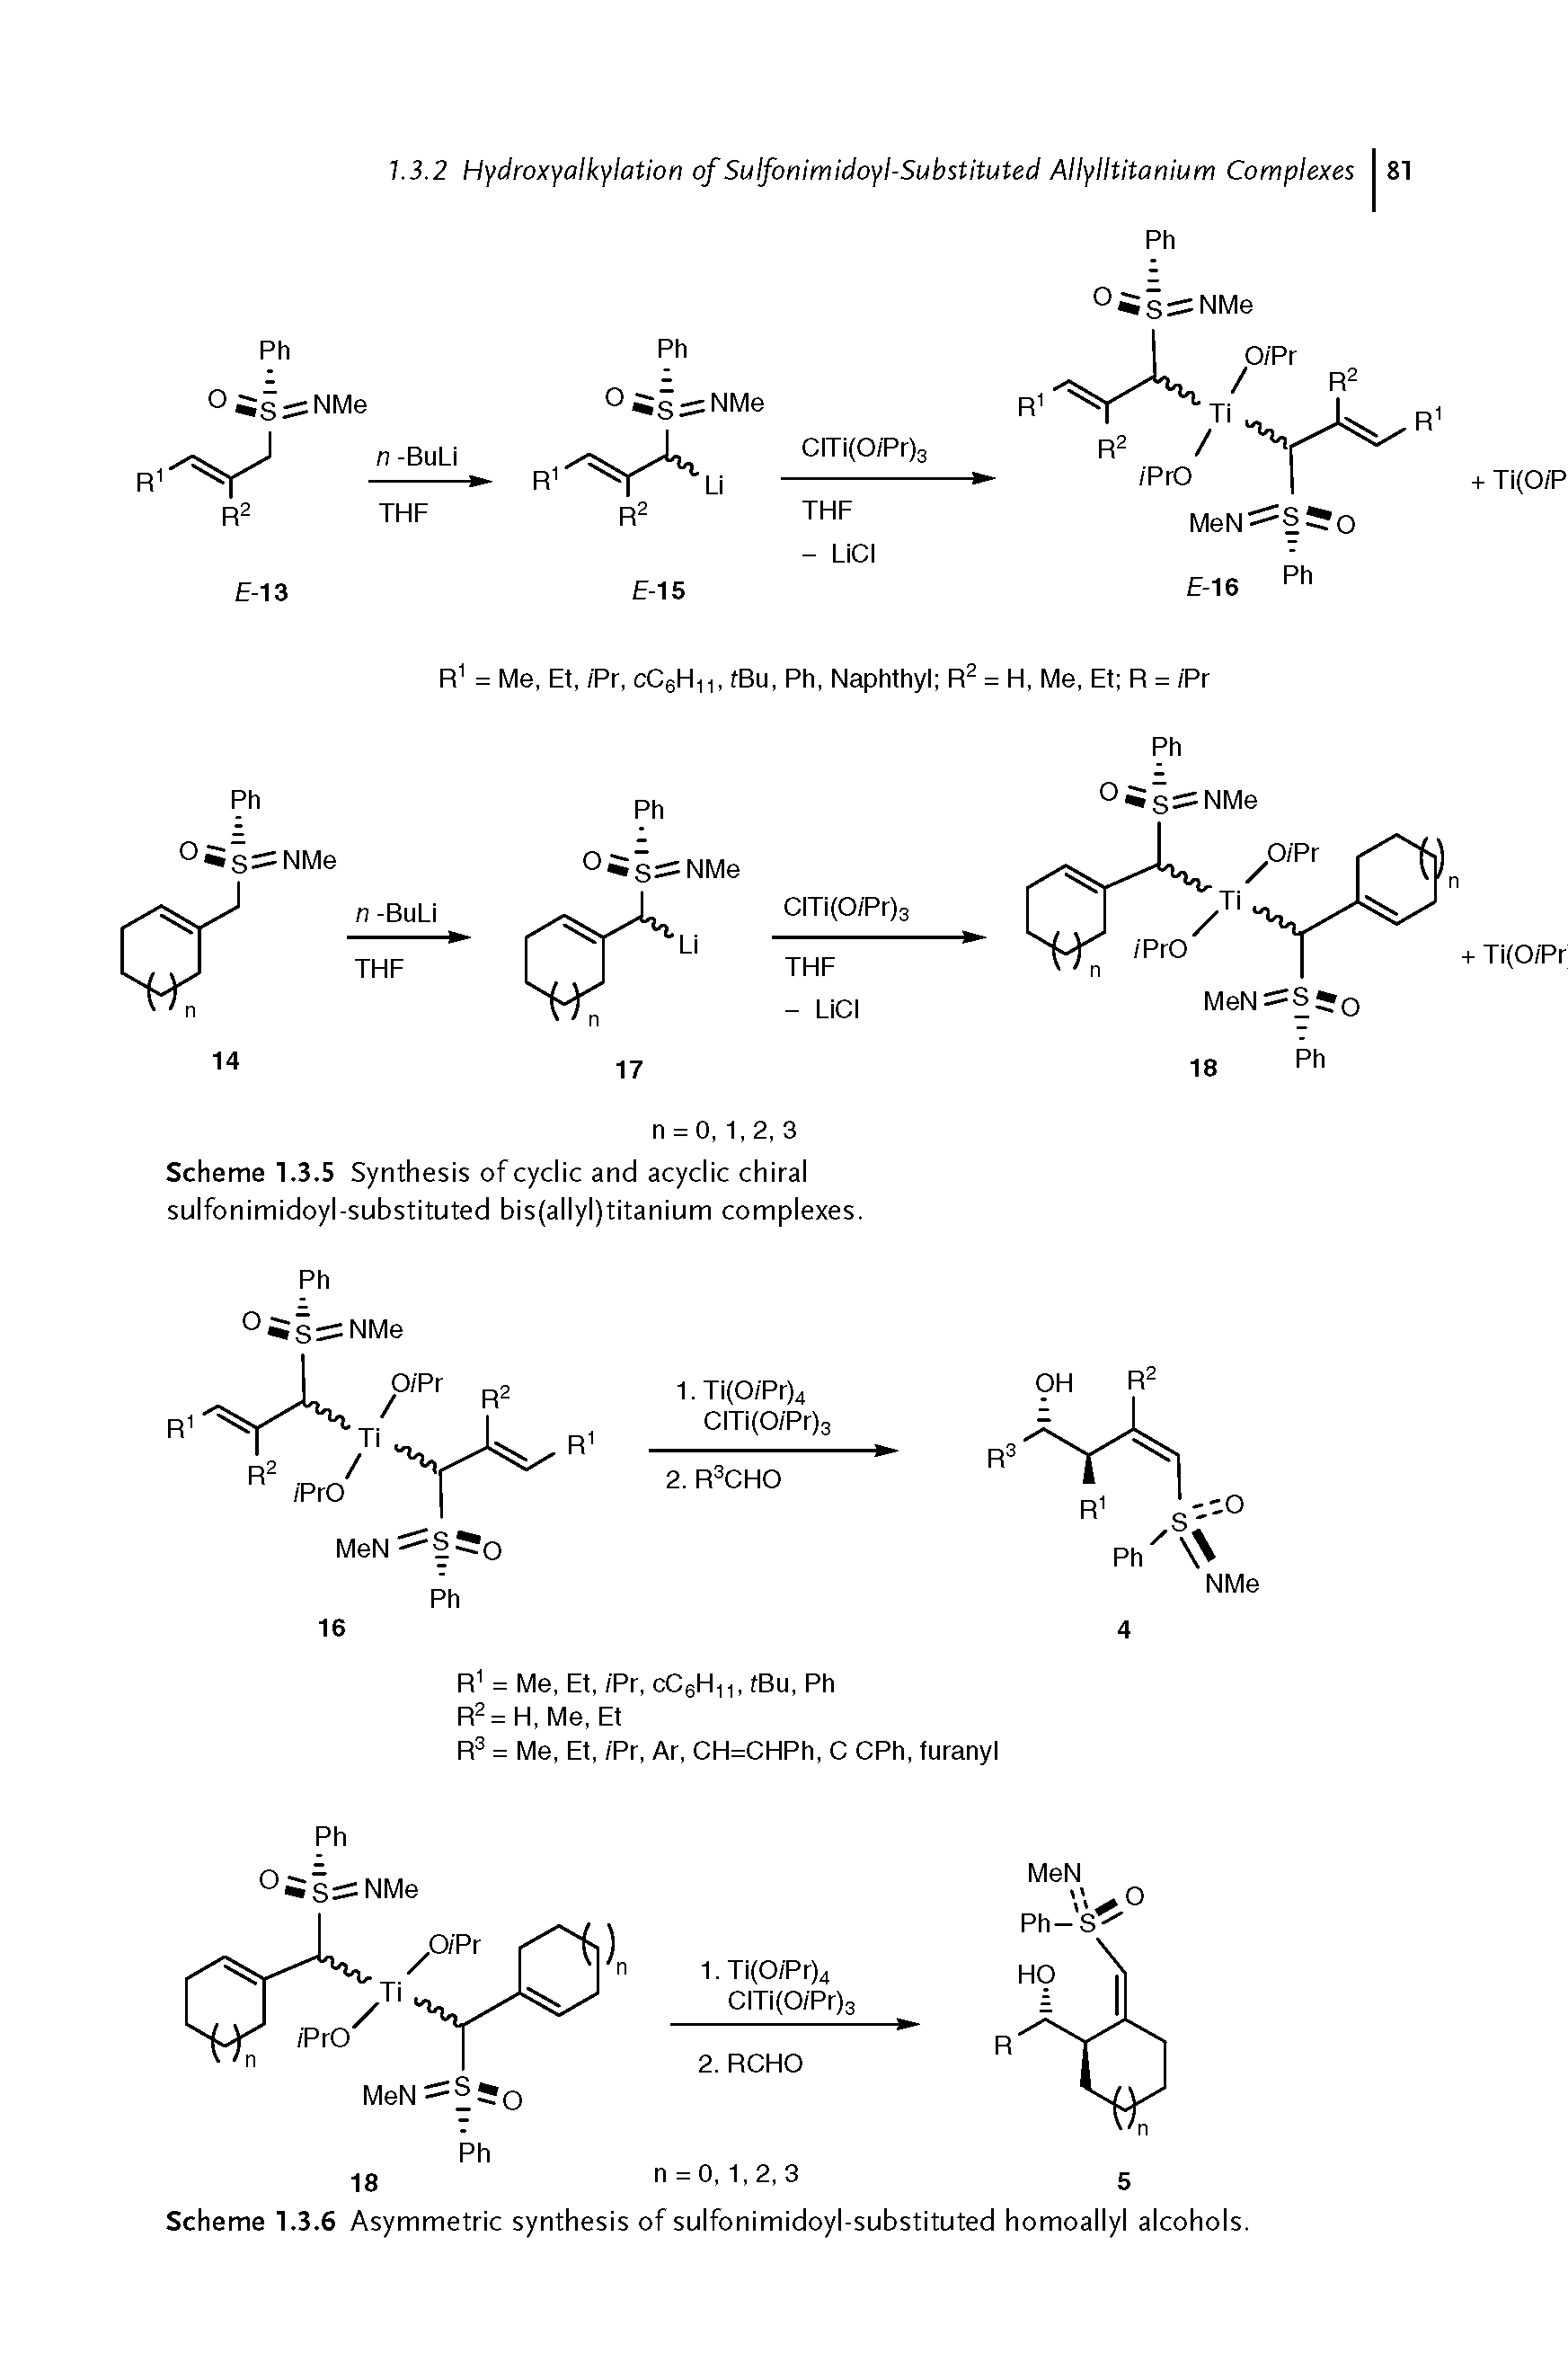 Scheme 1.3.5 Synthesis of cyclic and acyclic chiral sulfonimidoyl-substituted bis(allyl)titanium complexes.